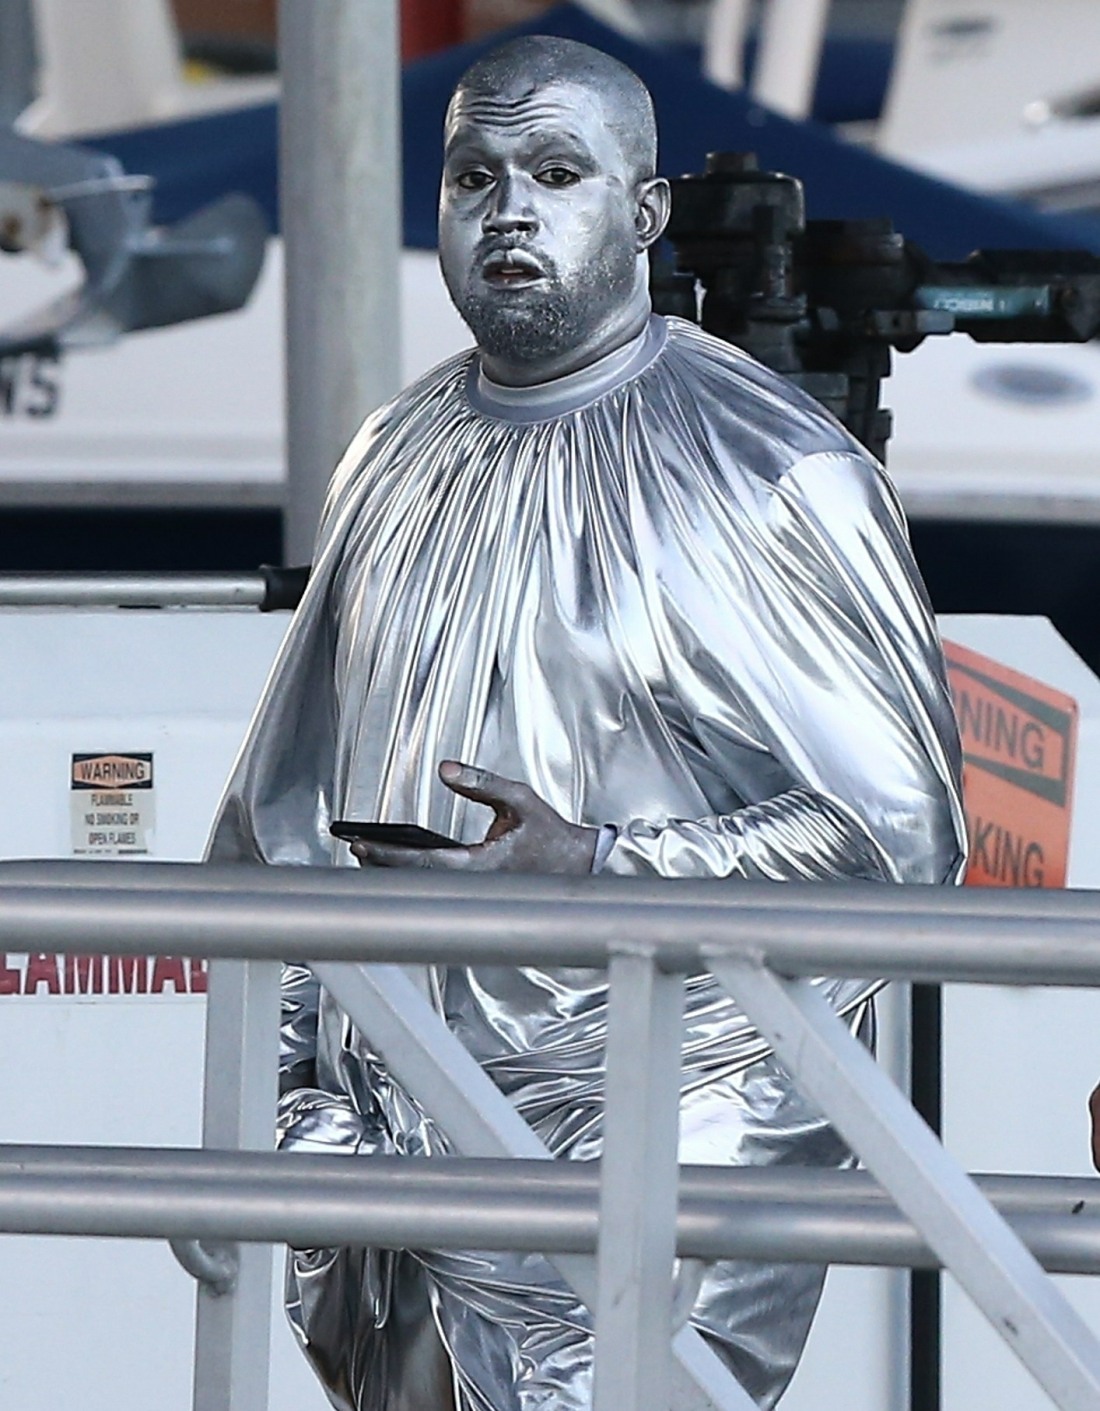 Kanye West attends a church event in Miami covered in silver